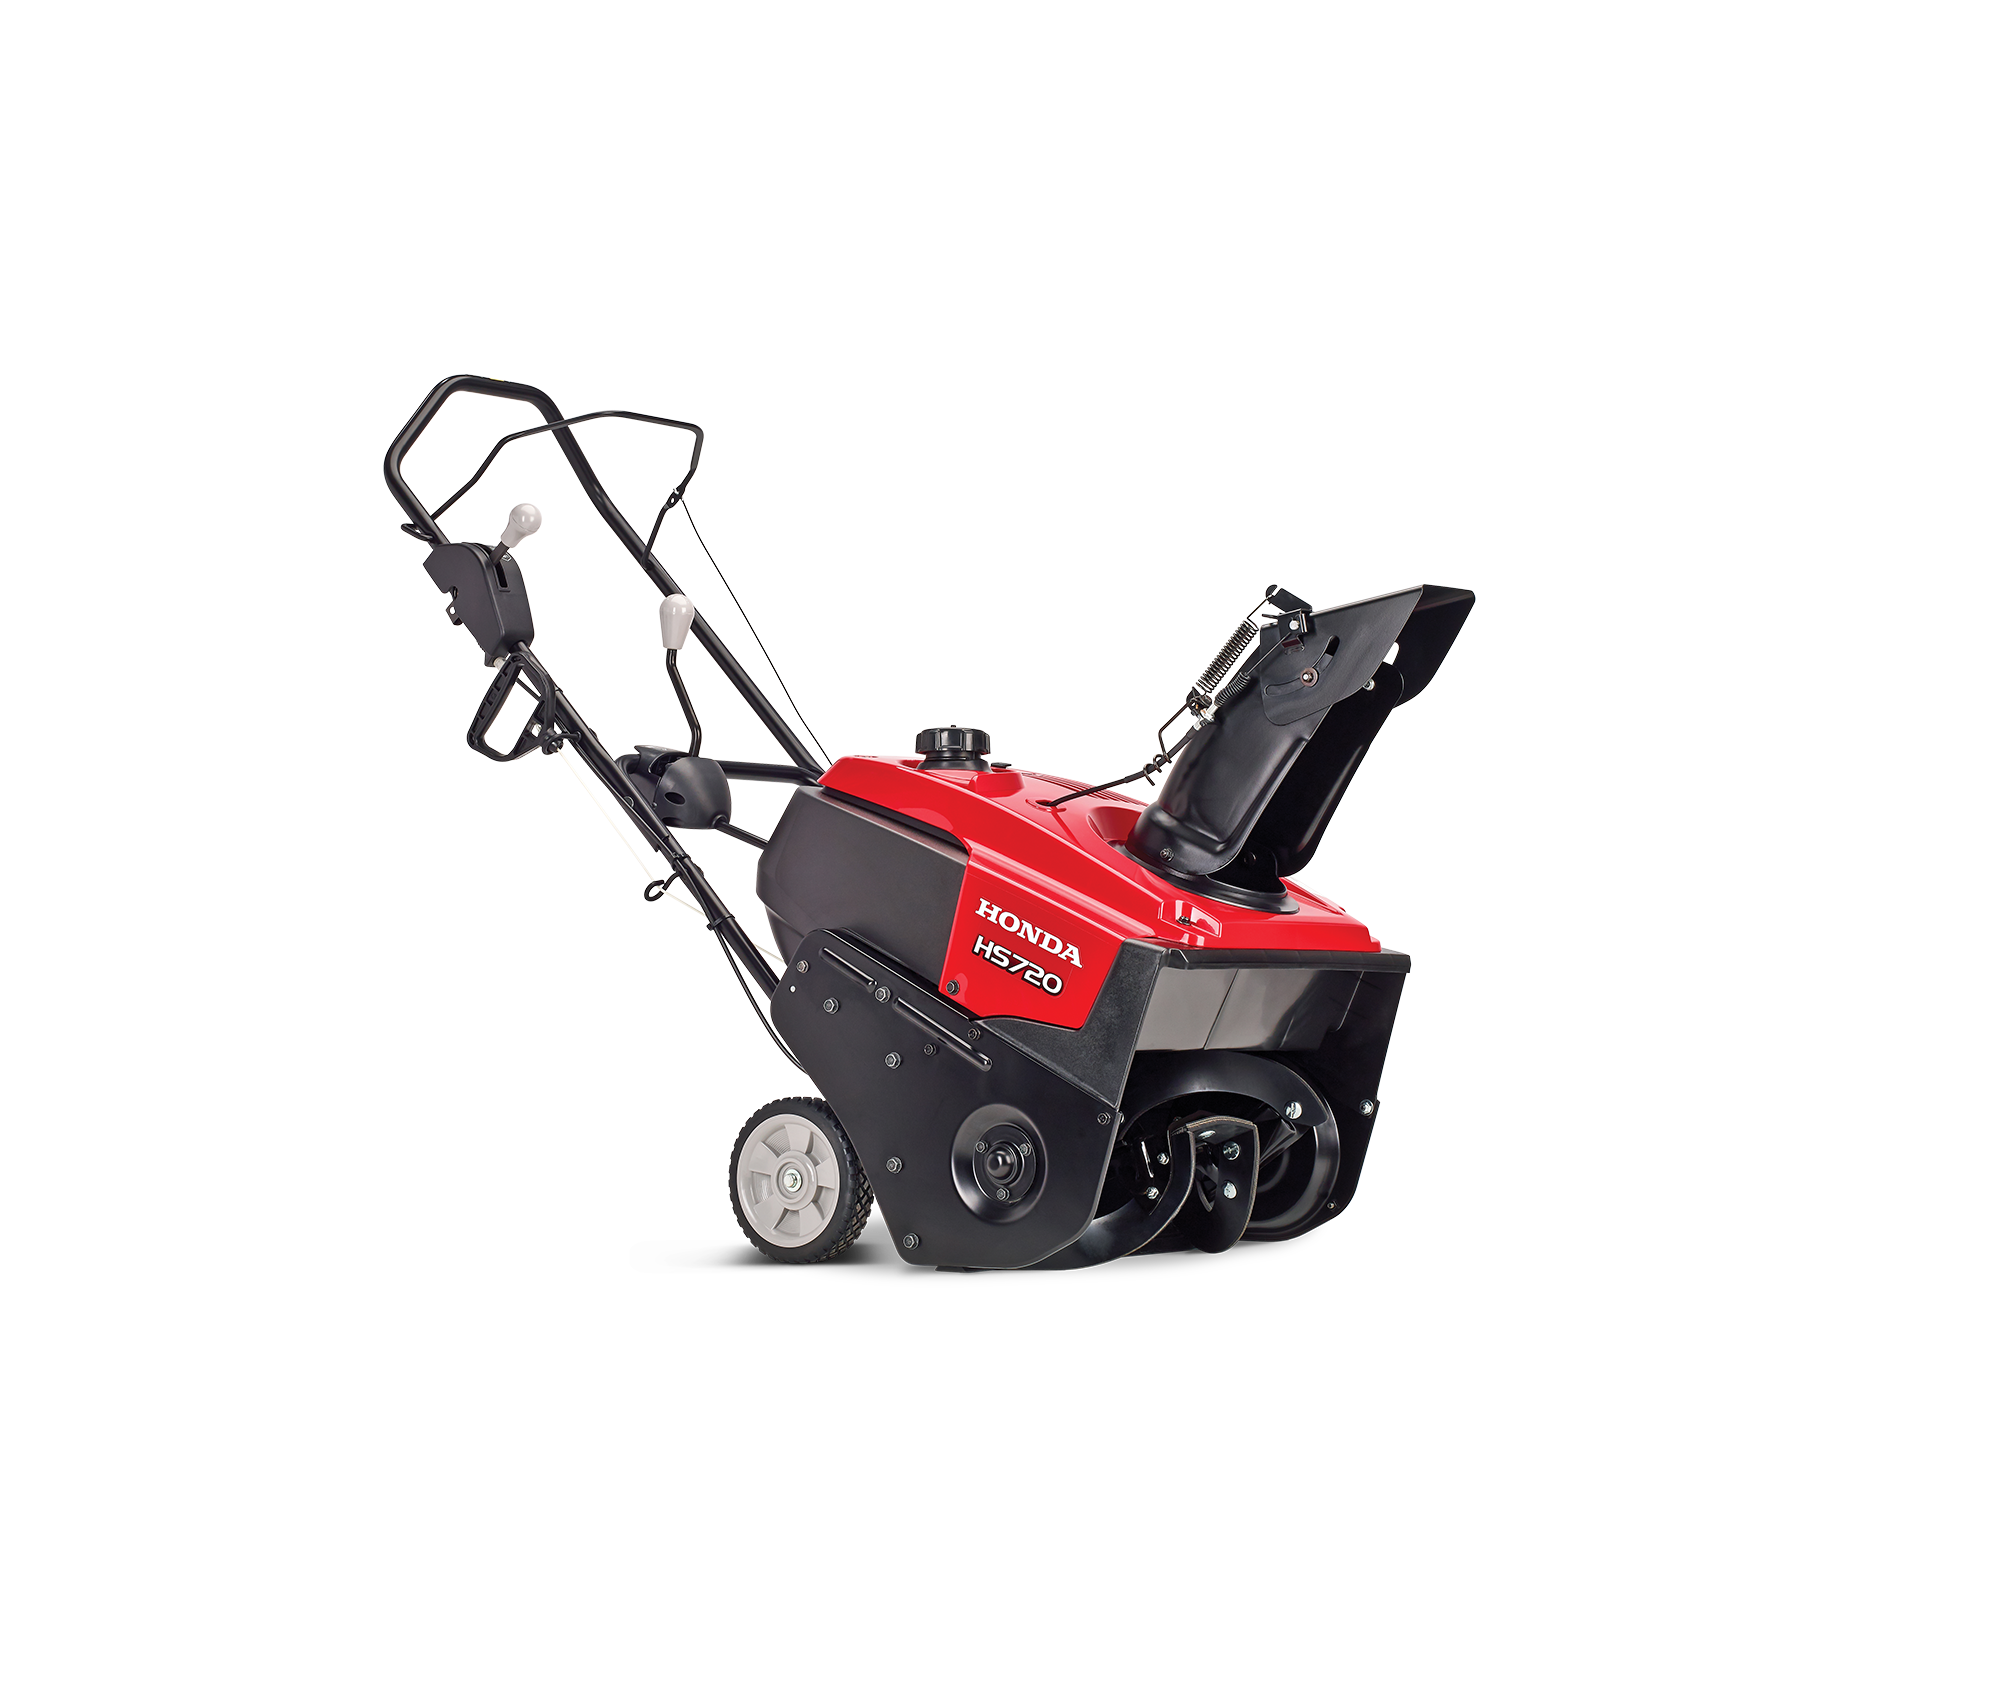 Image of the 20" Auger Assist Snowblower